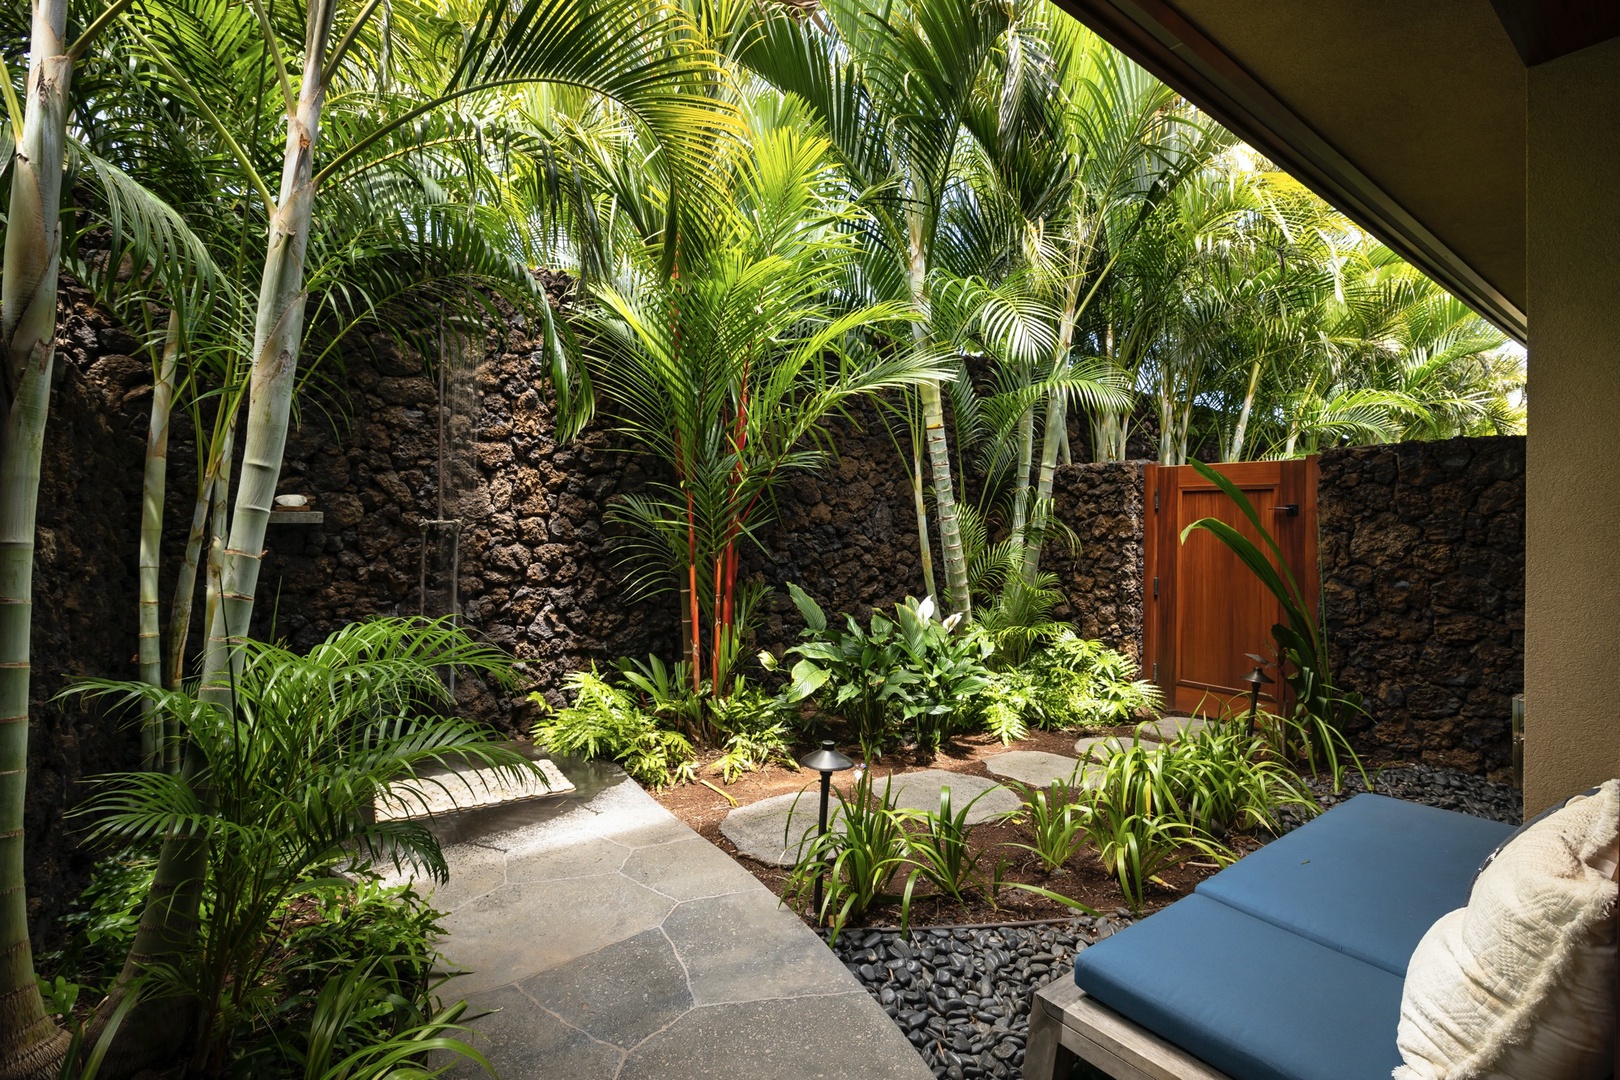 Kailua Kona Vacation Rentals, 4BD Kulanakauhale (3558) Estate Home at Four Seasons Resort at Hualalai - Gorgeous and generous outdoor shower garden - a truly tropical treat!